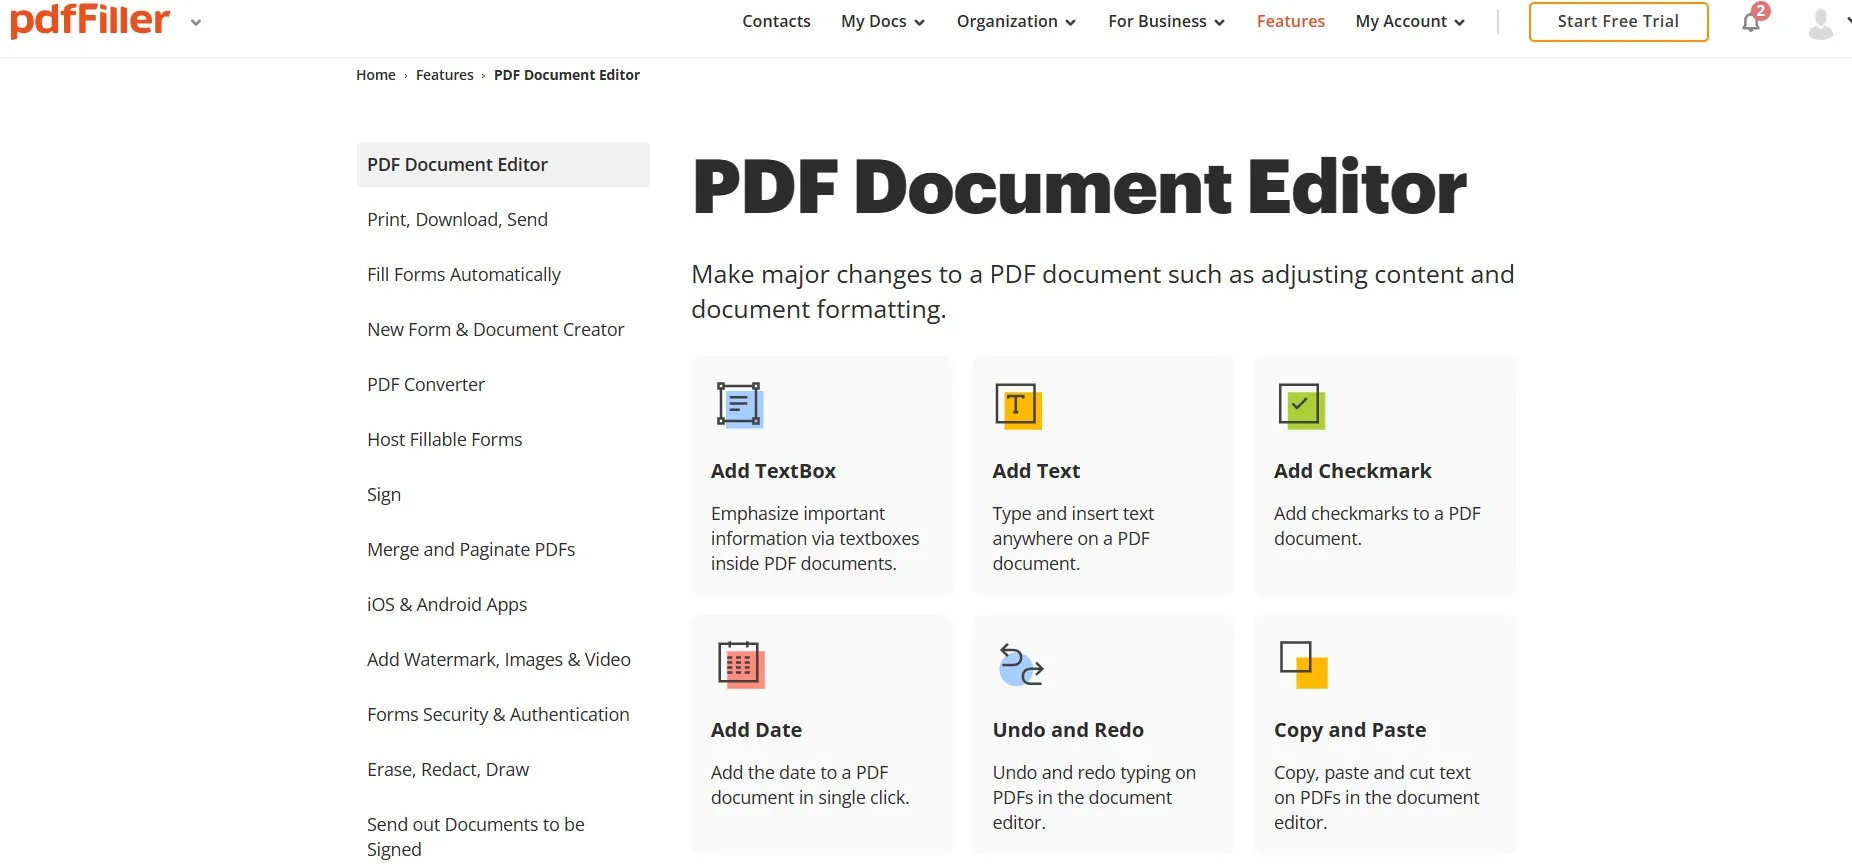 pdffiller the pdf document editor